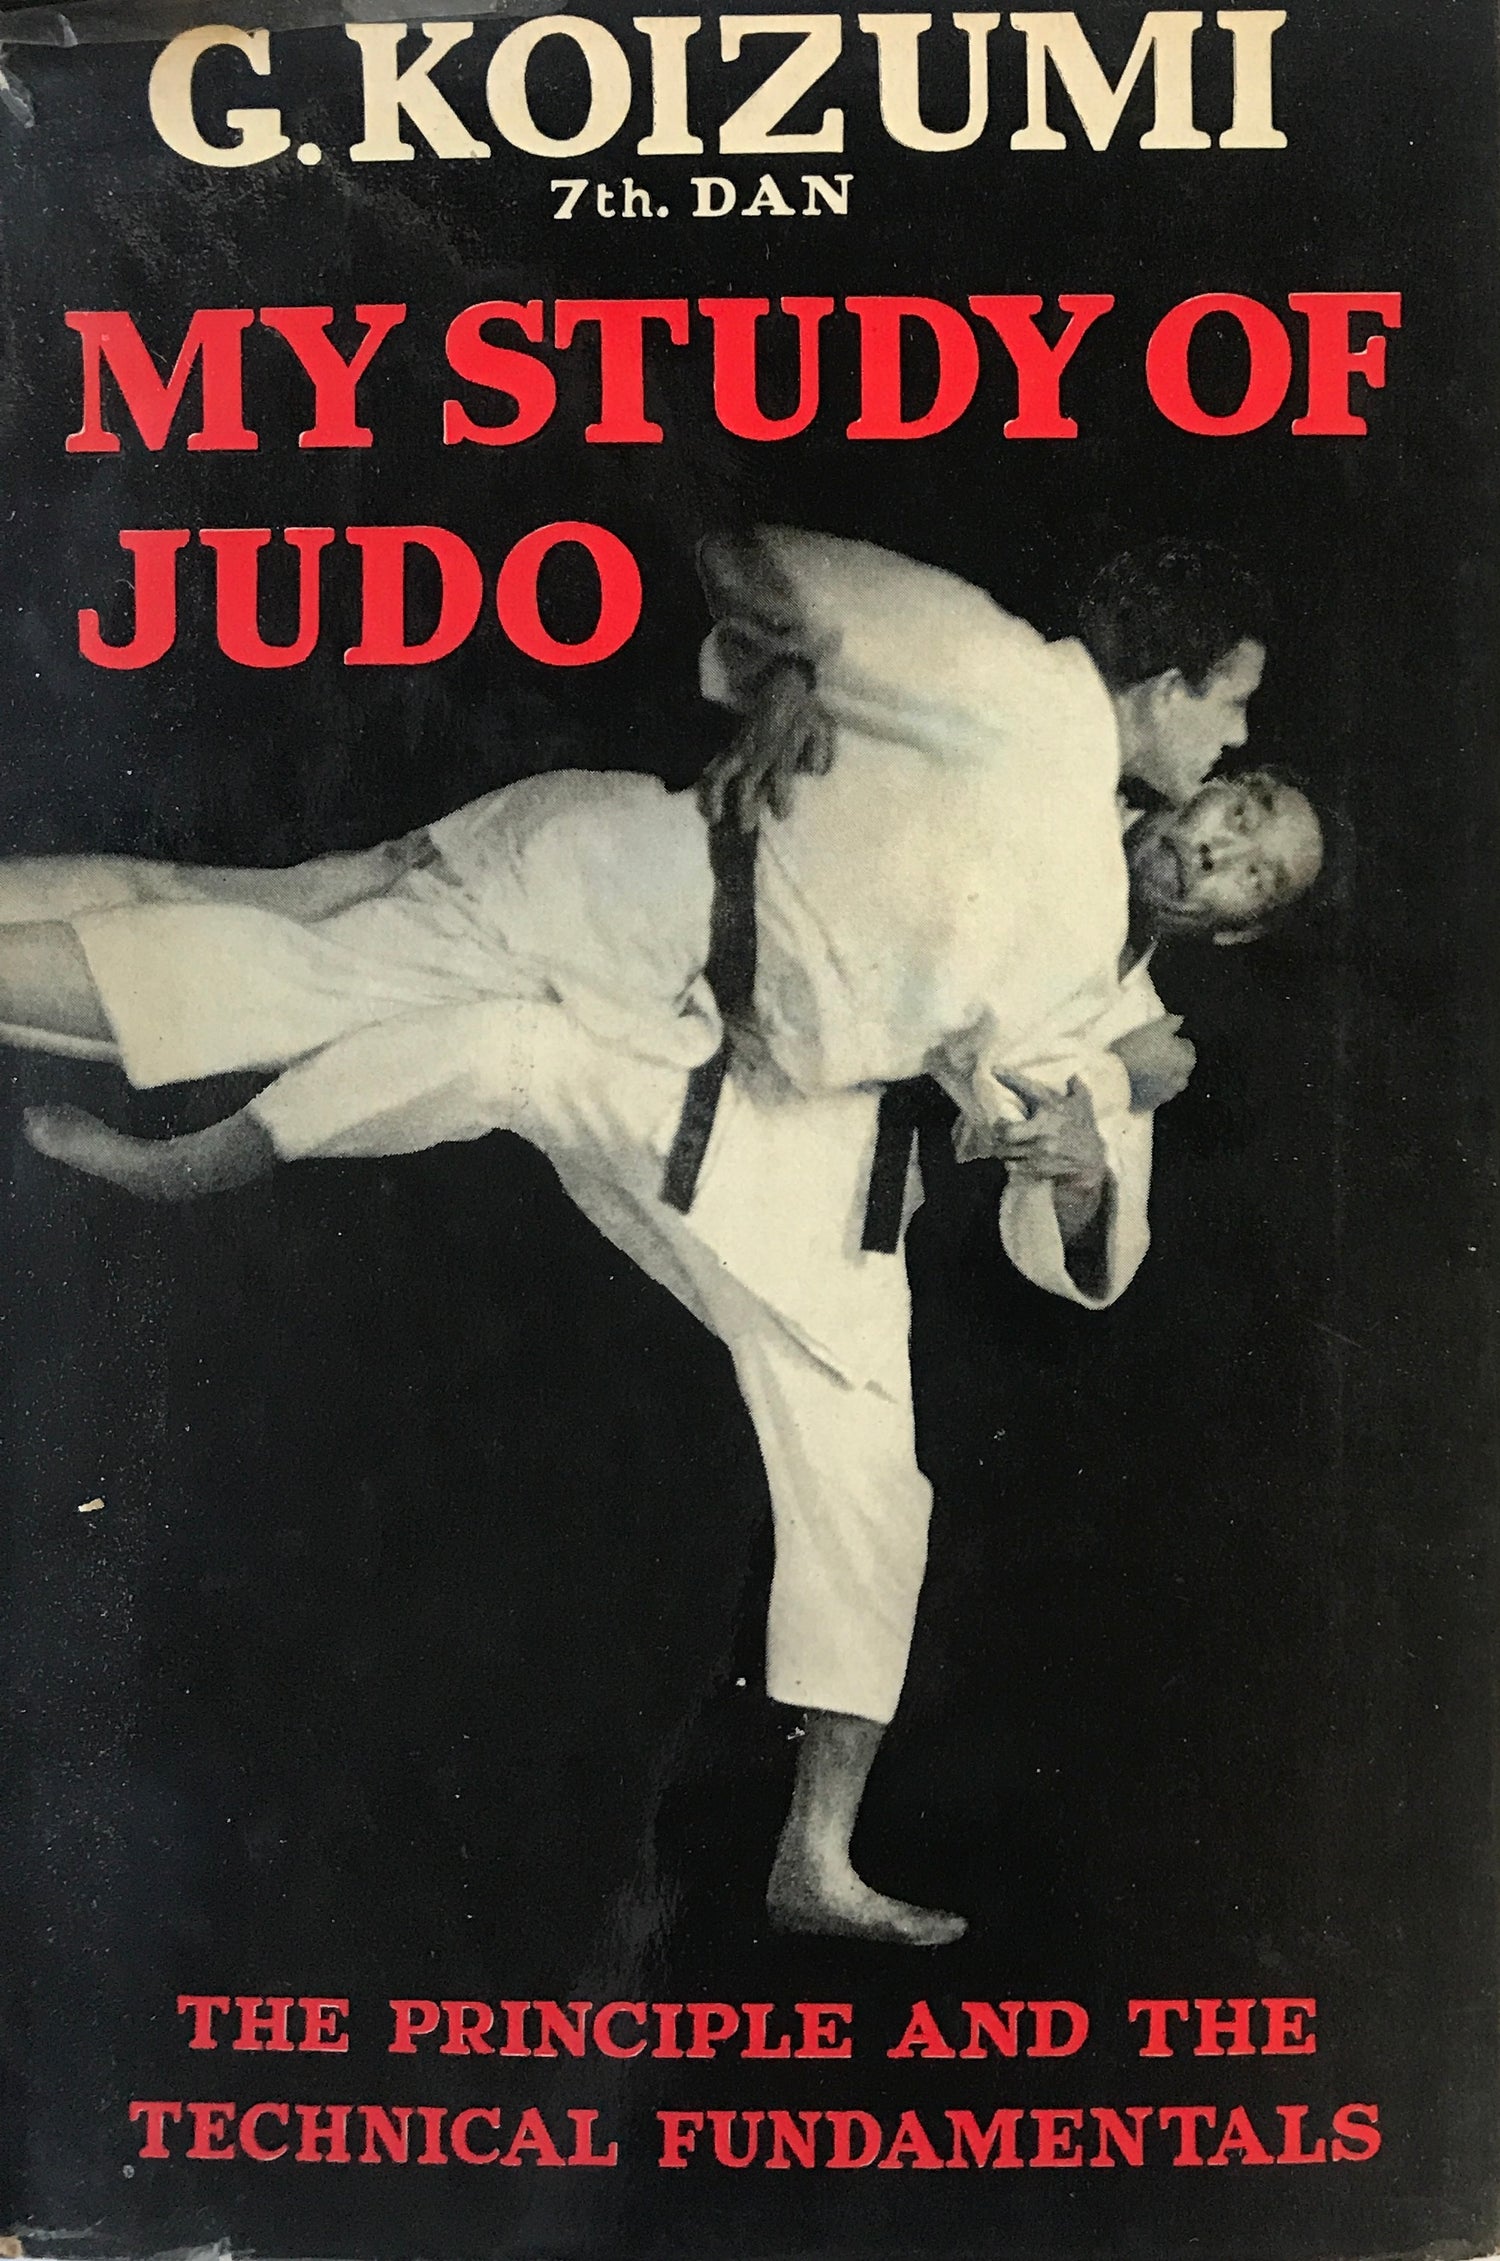 My Study of Judo: The Principles and the Technical Fundamentals Book by Gunji Koizumi (Hardcover) (Preowned) - Budovideos Inc